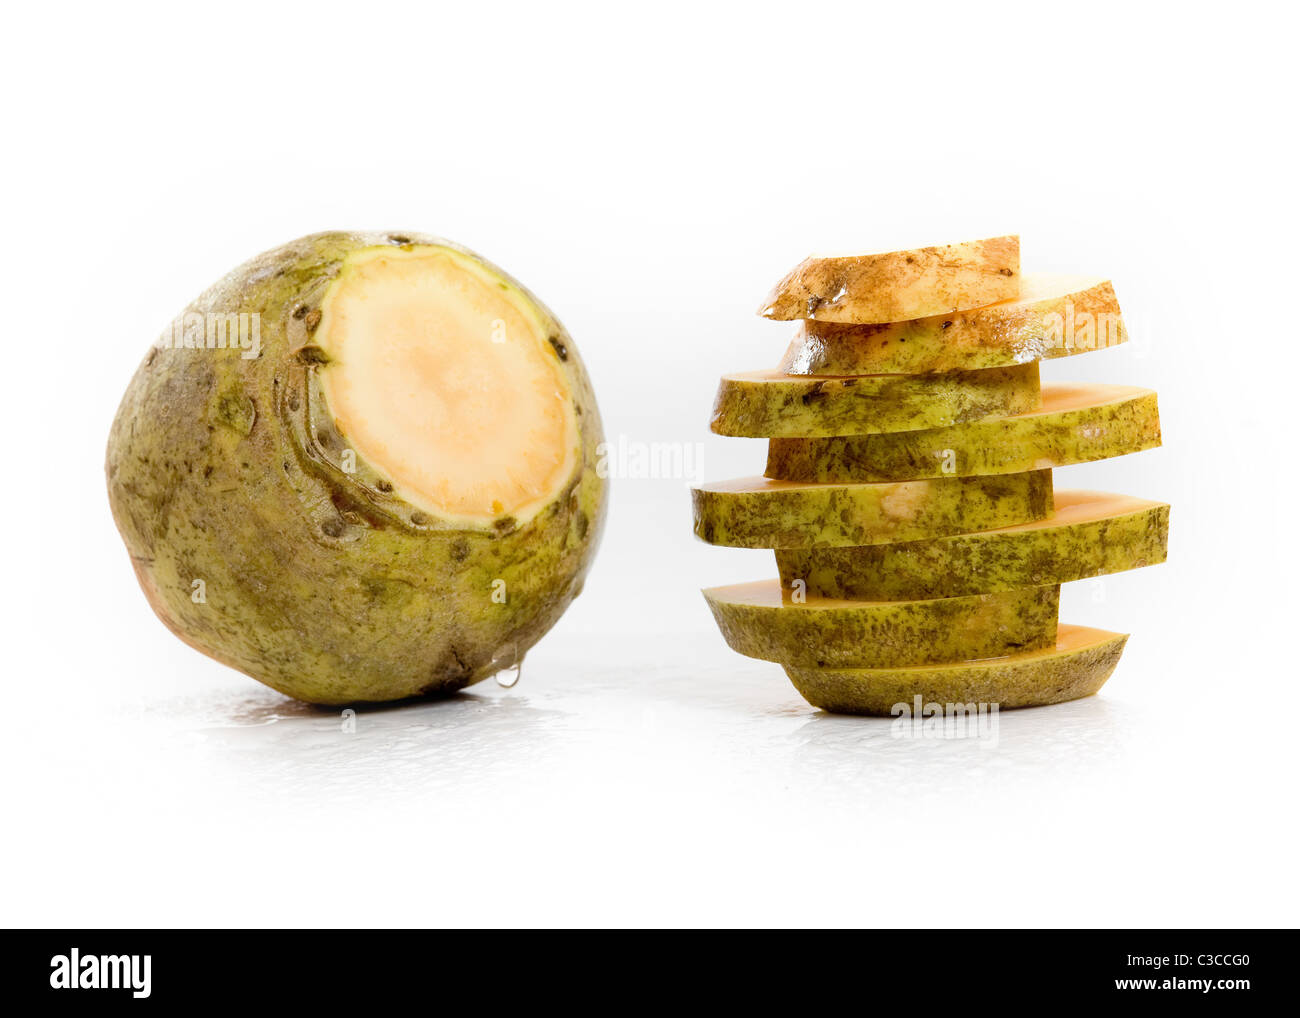 Yellow Turnip and some freshly cut slices of it Stock Photo